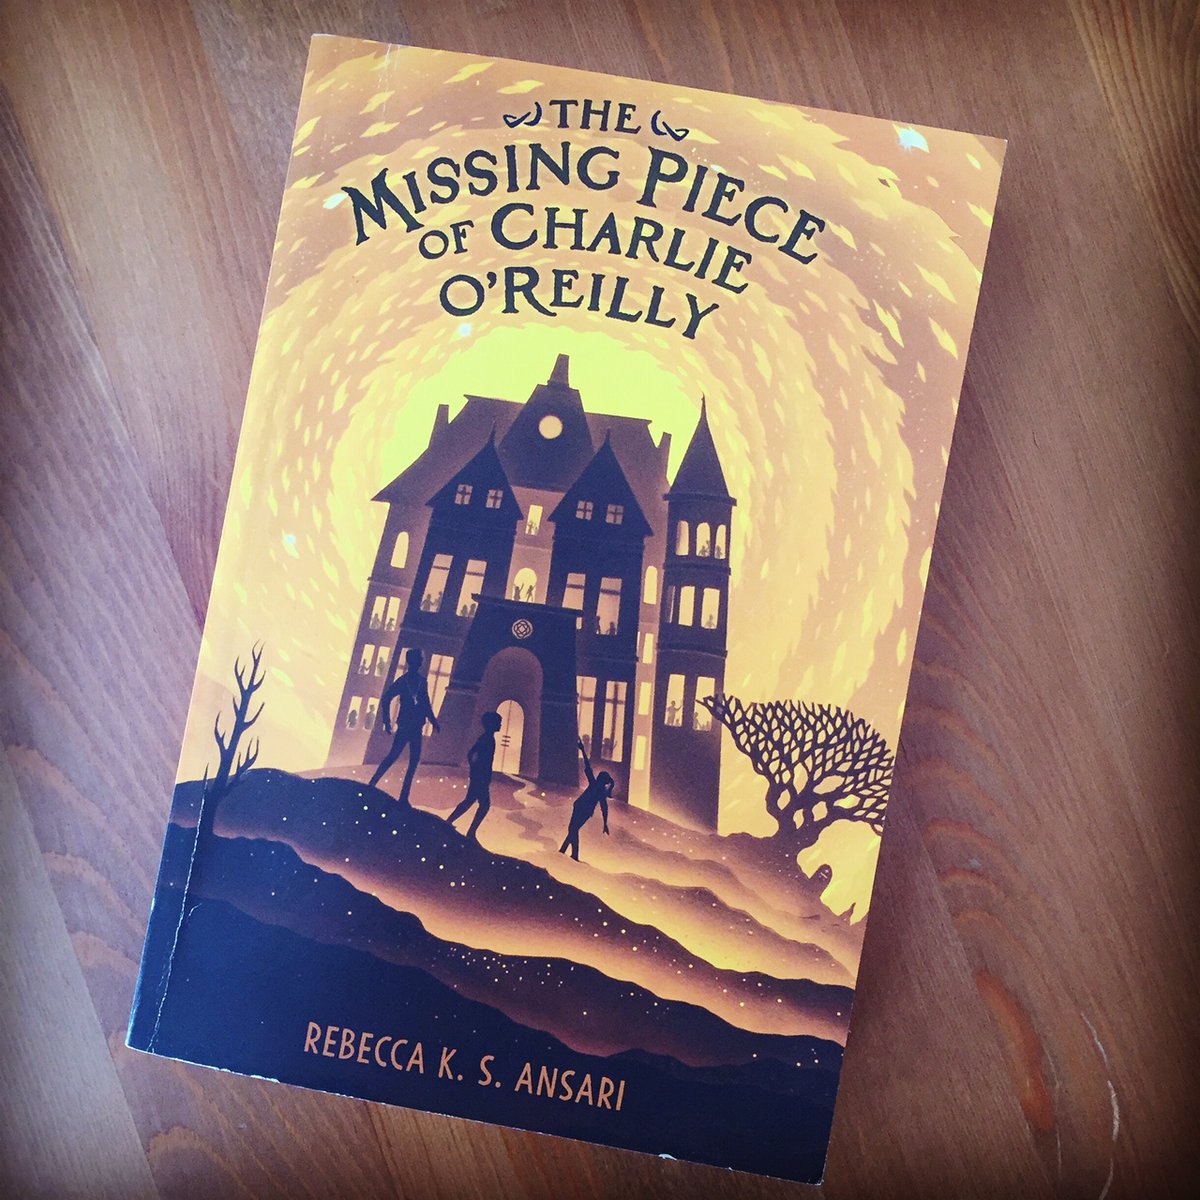 Looking for a great read for #MiddleGradeMarch? I highly recommend @rebeccaksansari's beautifully written The Missing Piece of Charlie O’Reilly!

#MiddleGradeMonday #WhatToReadNext